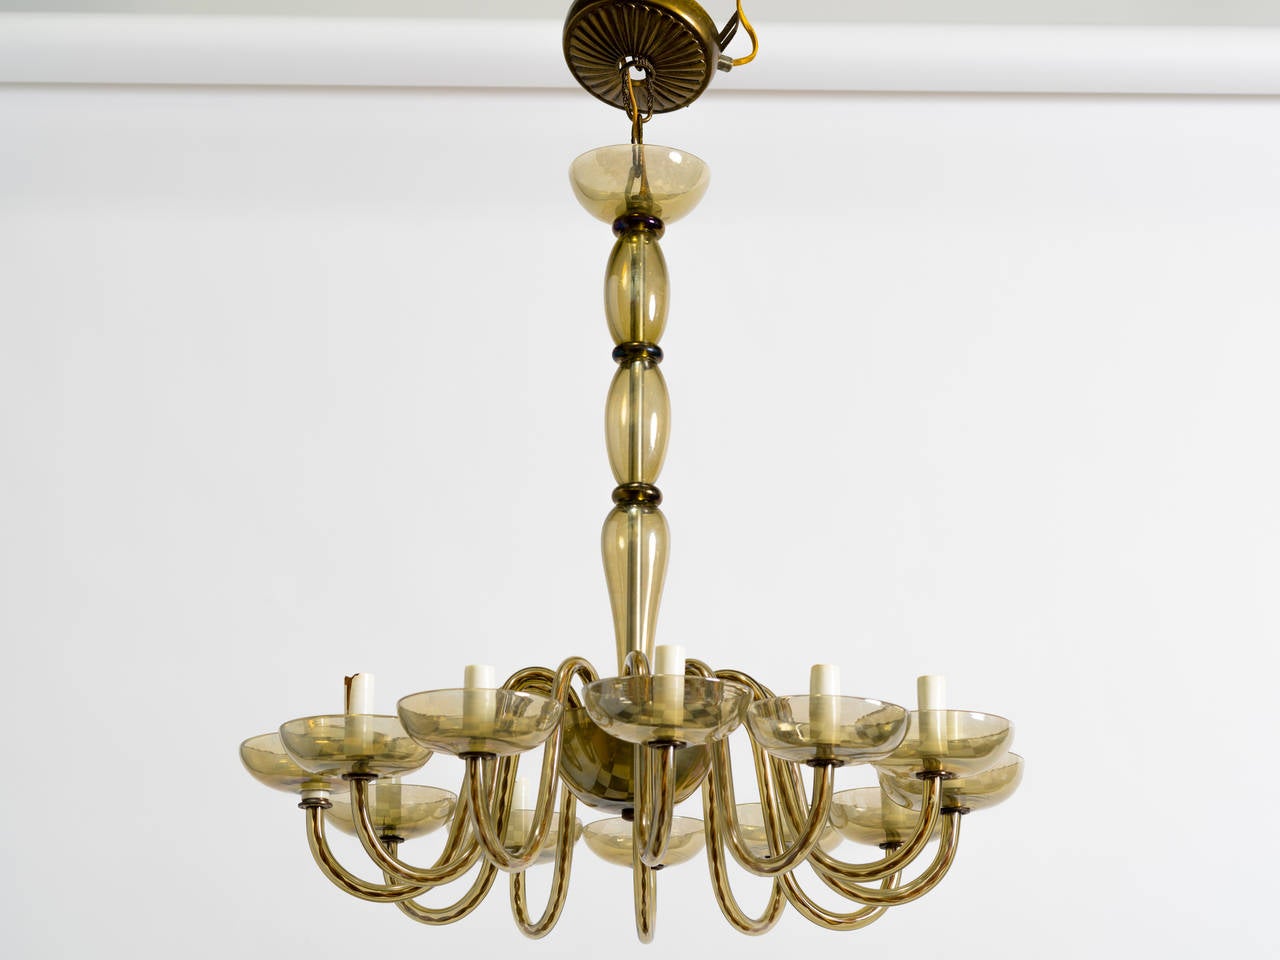 Its rare to see so many arms on a fixture this size. Murano glass fixture from the 1970s.